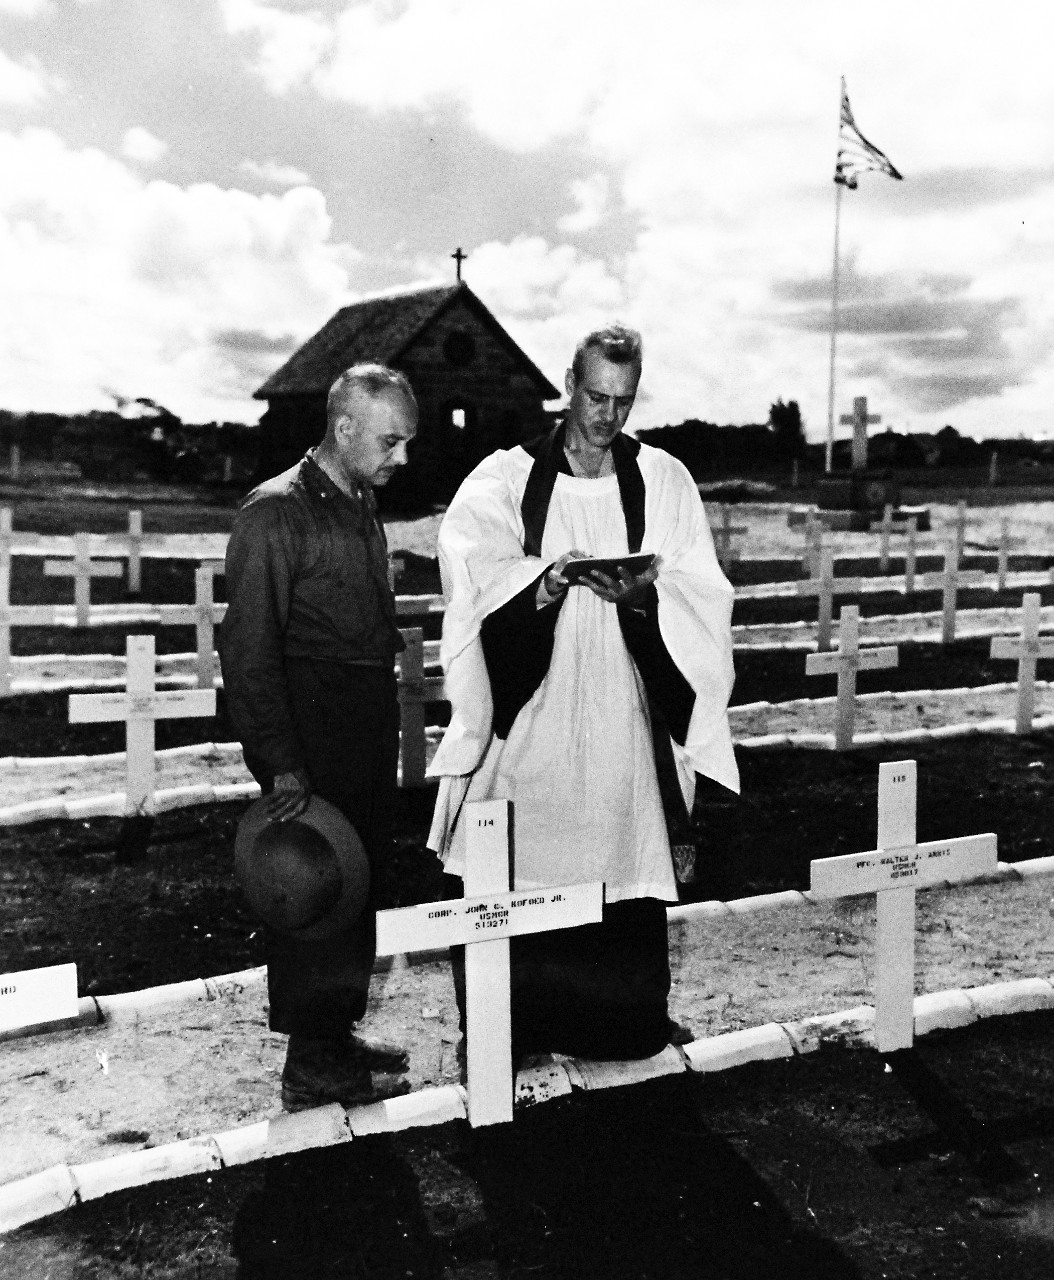 80-G-347084: Okinawa,  Ryukyus Islands, Chaplains, October 1945.   Chaplains Lieutenant Commander O.G. Crotefend (with robe on) shown with Chaplain Matthew V. Crosson at the 6th Marine cemetery at Okinawa Ryukyu Islands.    Photograph received October 5, 1945.    Official U.S. Navy photograph, now in the collections of the National Archives.  (2017/02/14).  